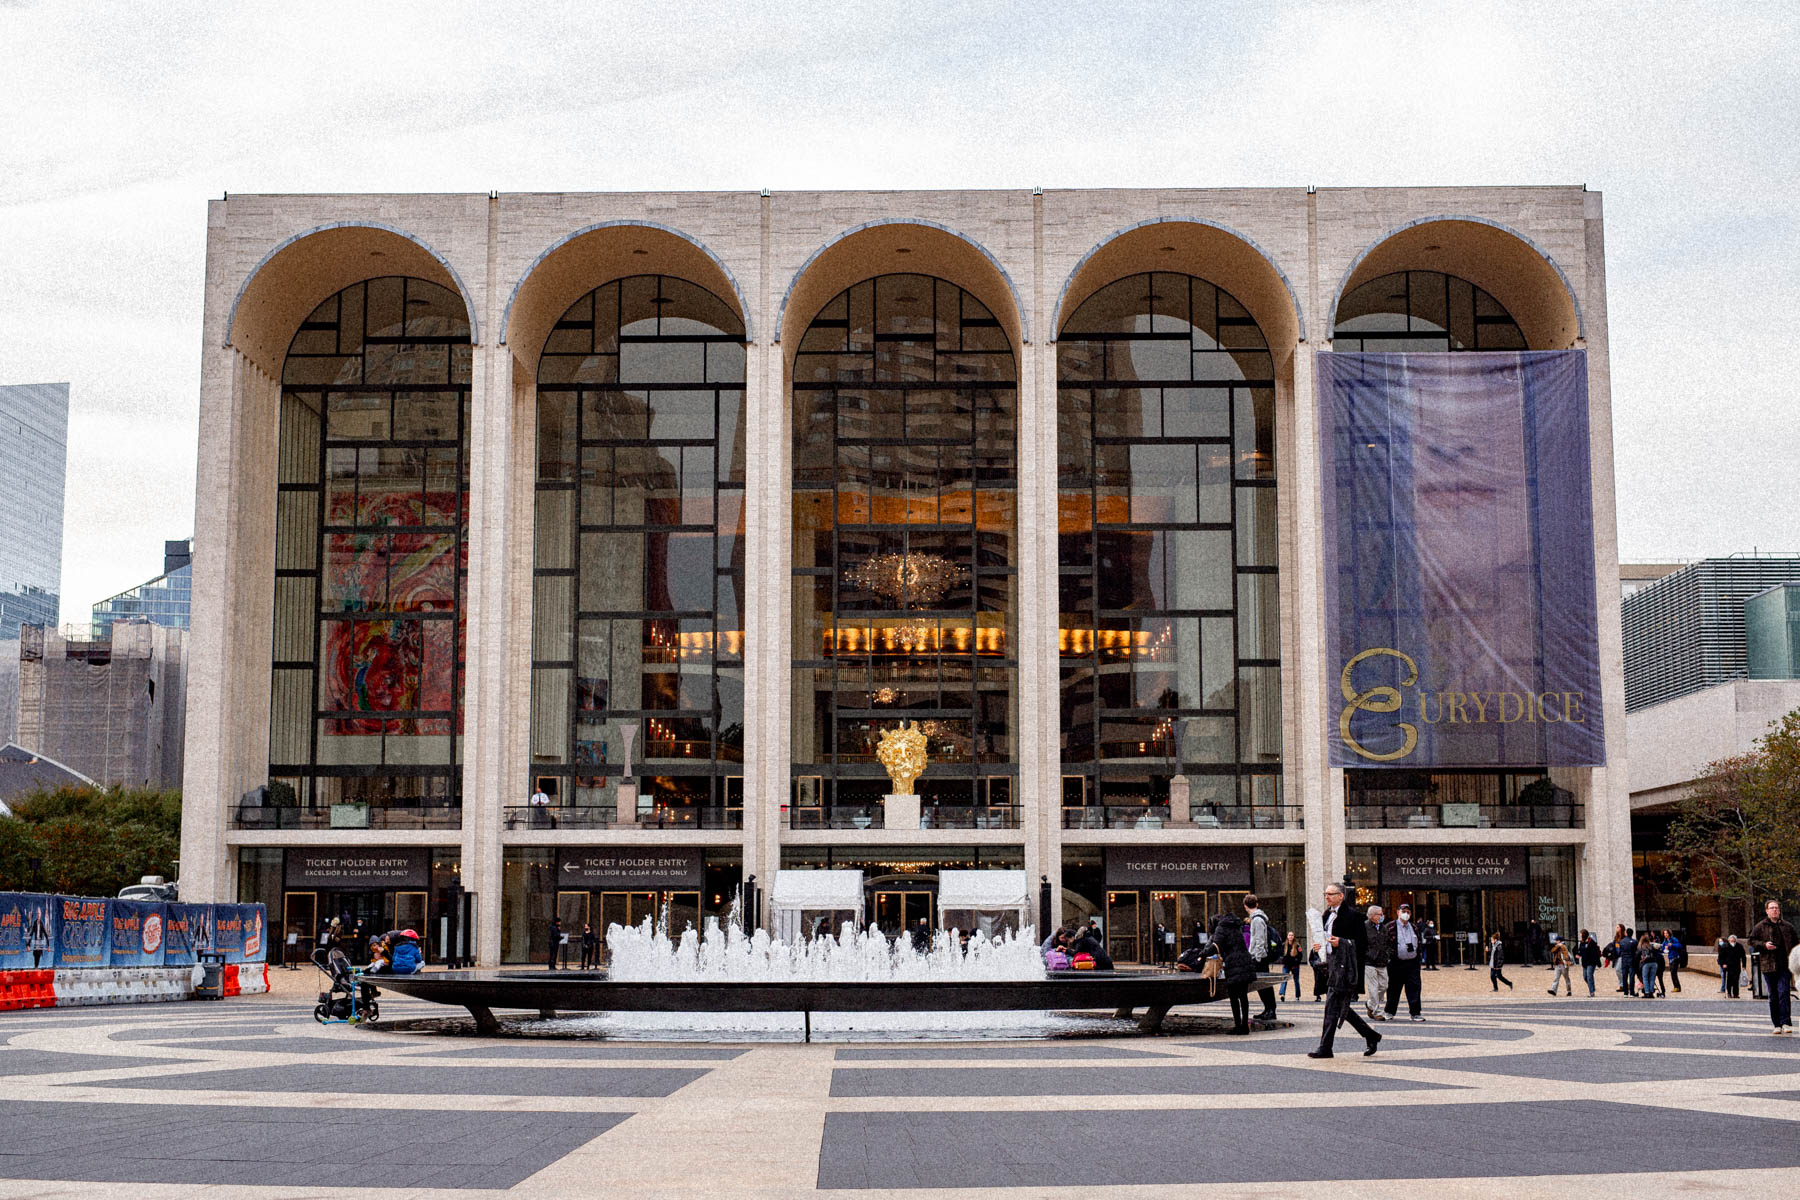 Romantic date nights in New York City
Lincoln Center Upper West Side